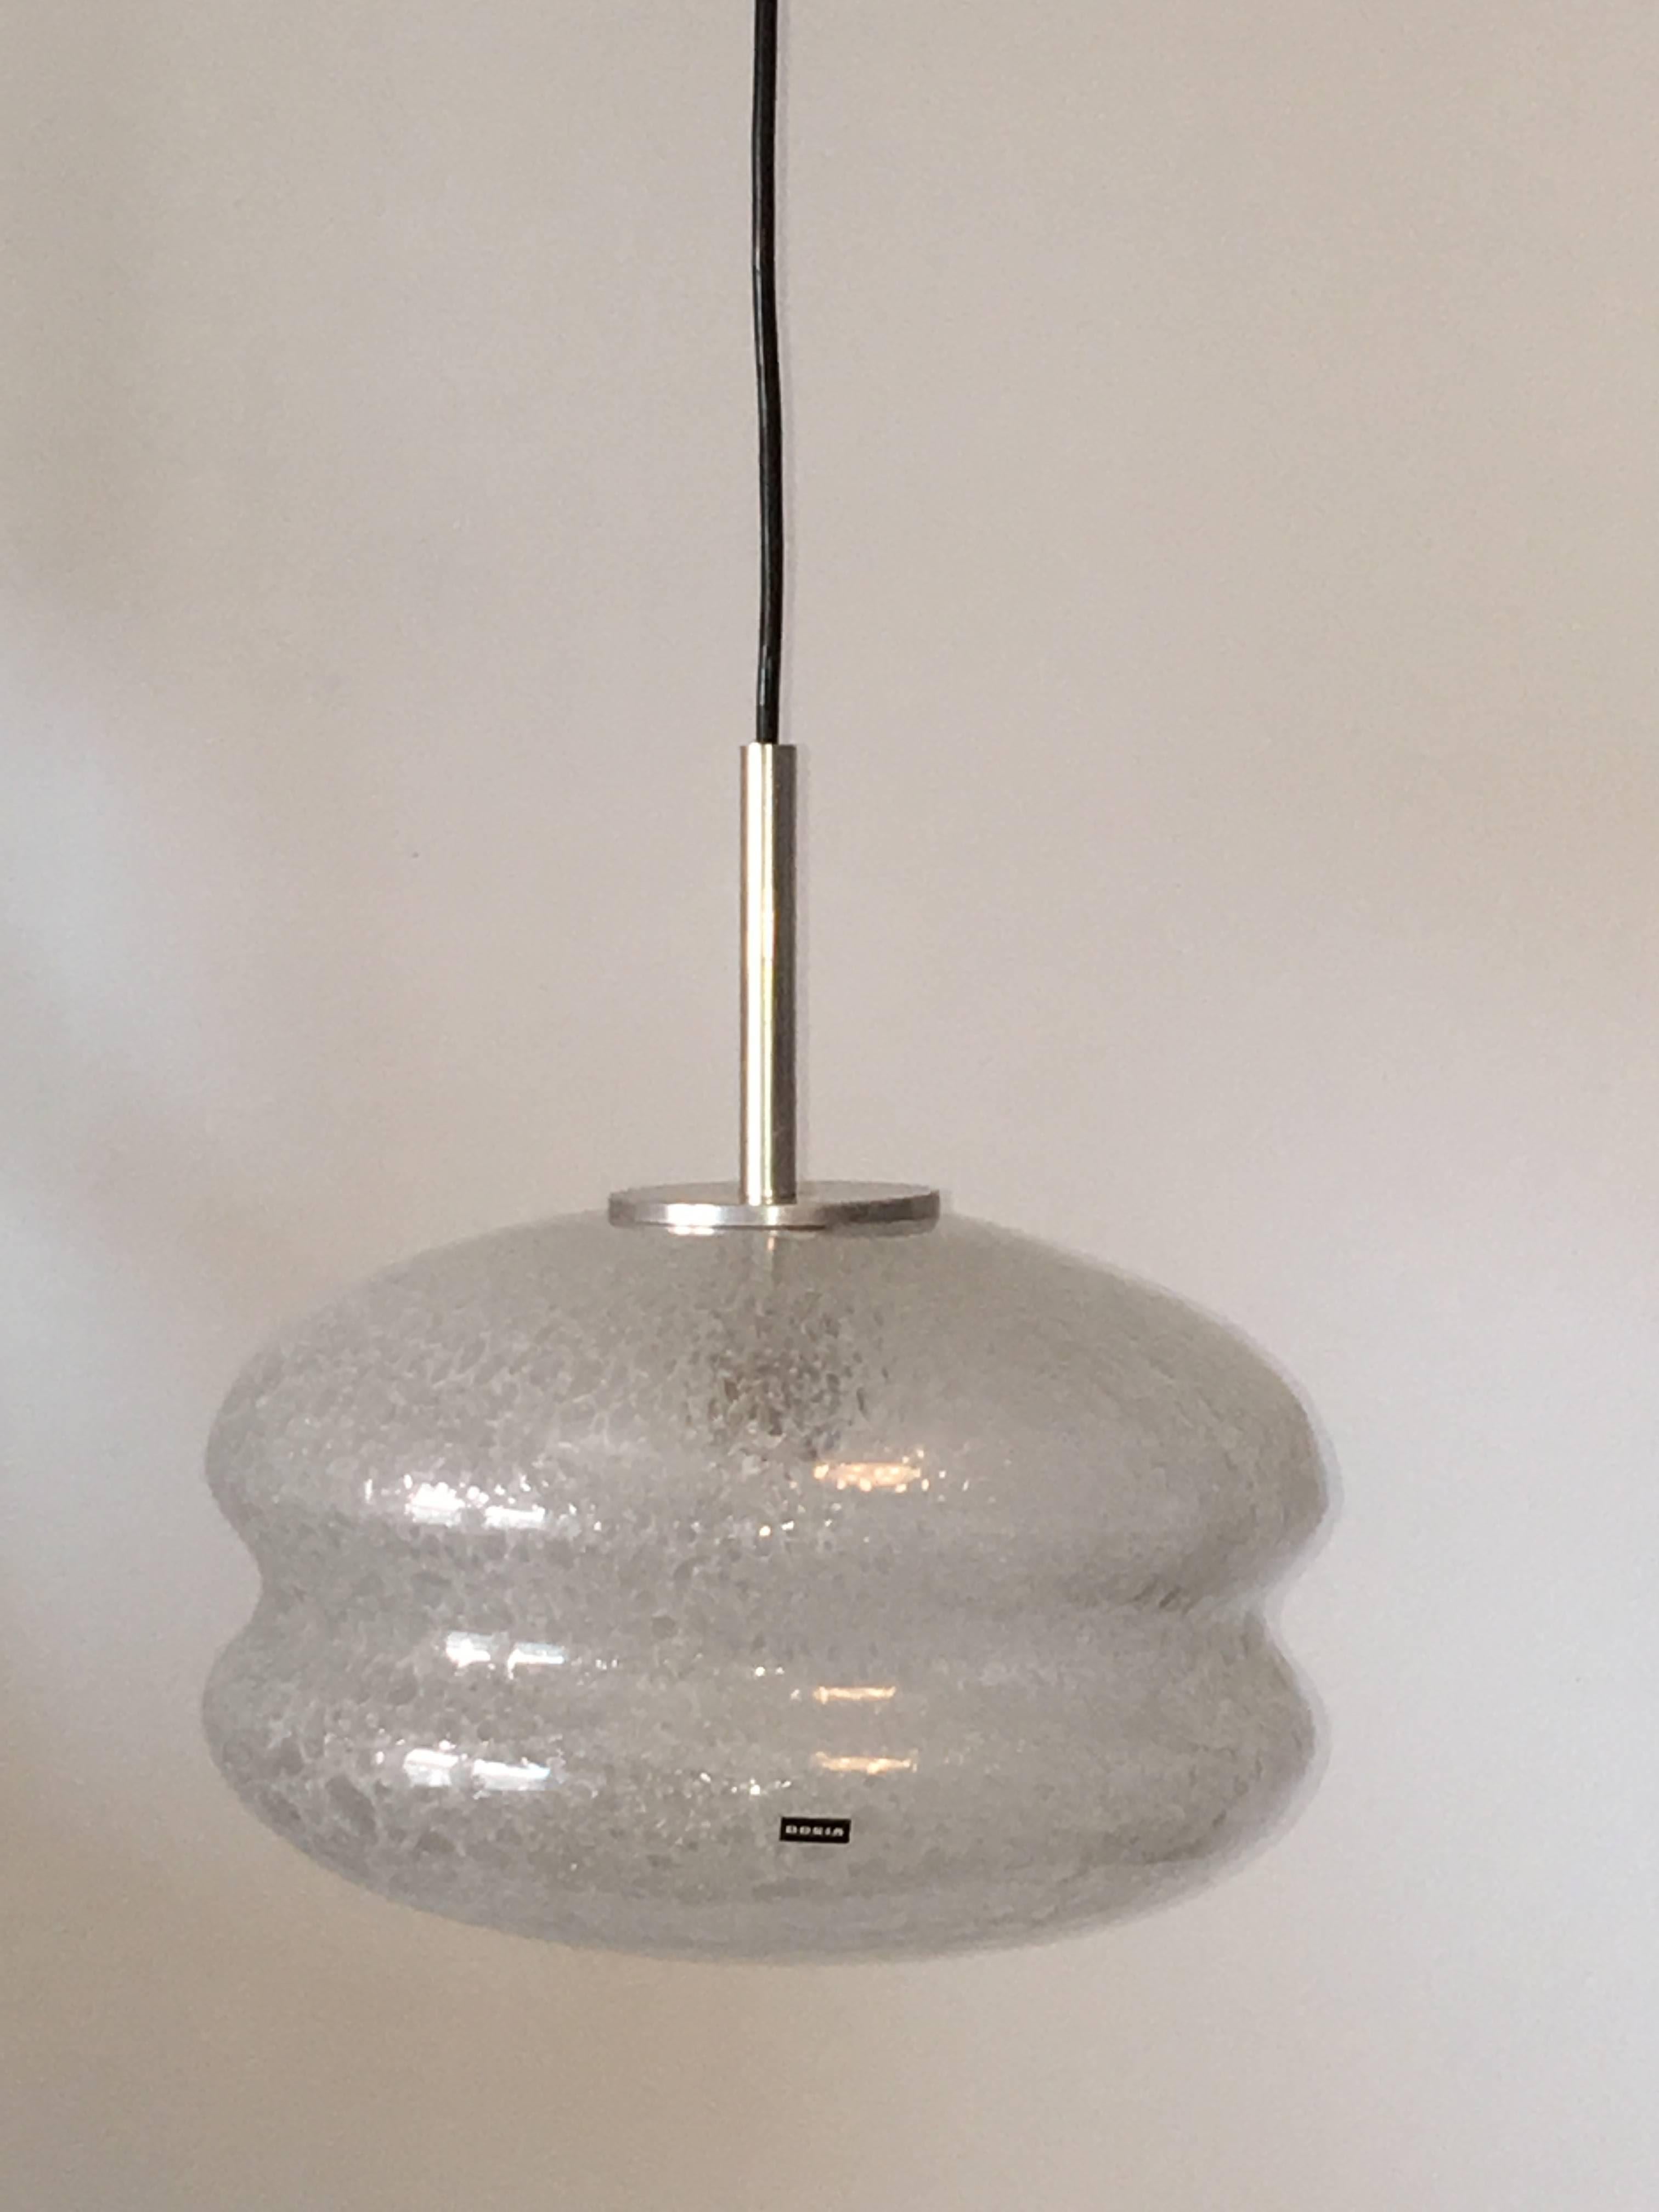 A air bubble glass pendant made in the 1960s by Doria, it has a black colored wire. The fixture requires one European E27 Edison bulb, up to 150 watts. Very nice bright lighting effect.